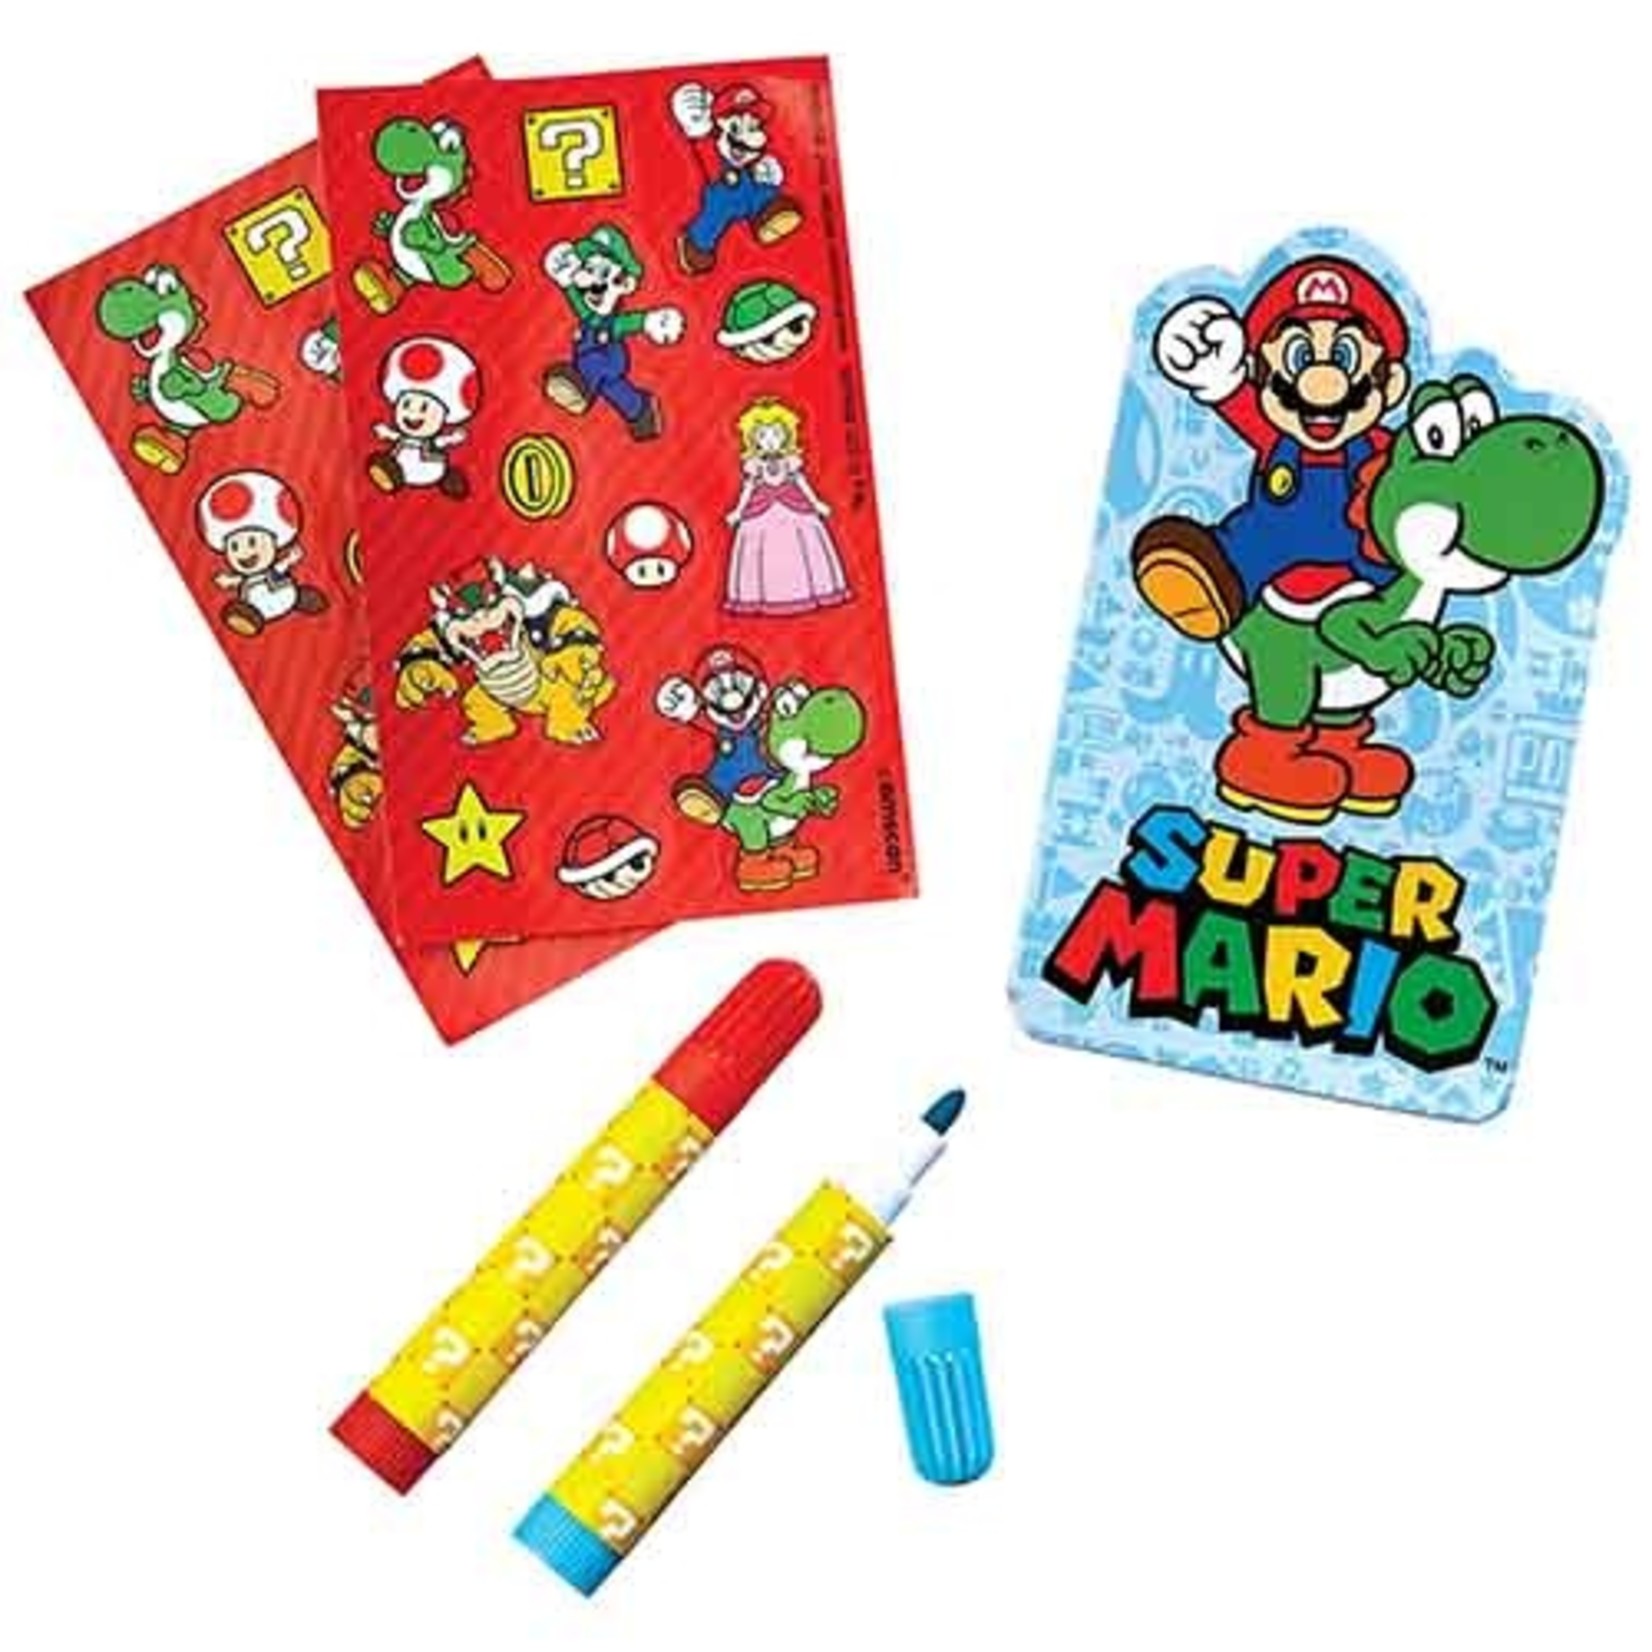 Amscan Super Mario Brothers Stationary Favor Set - 5ct.